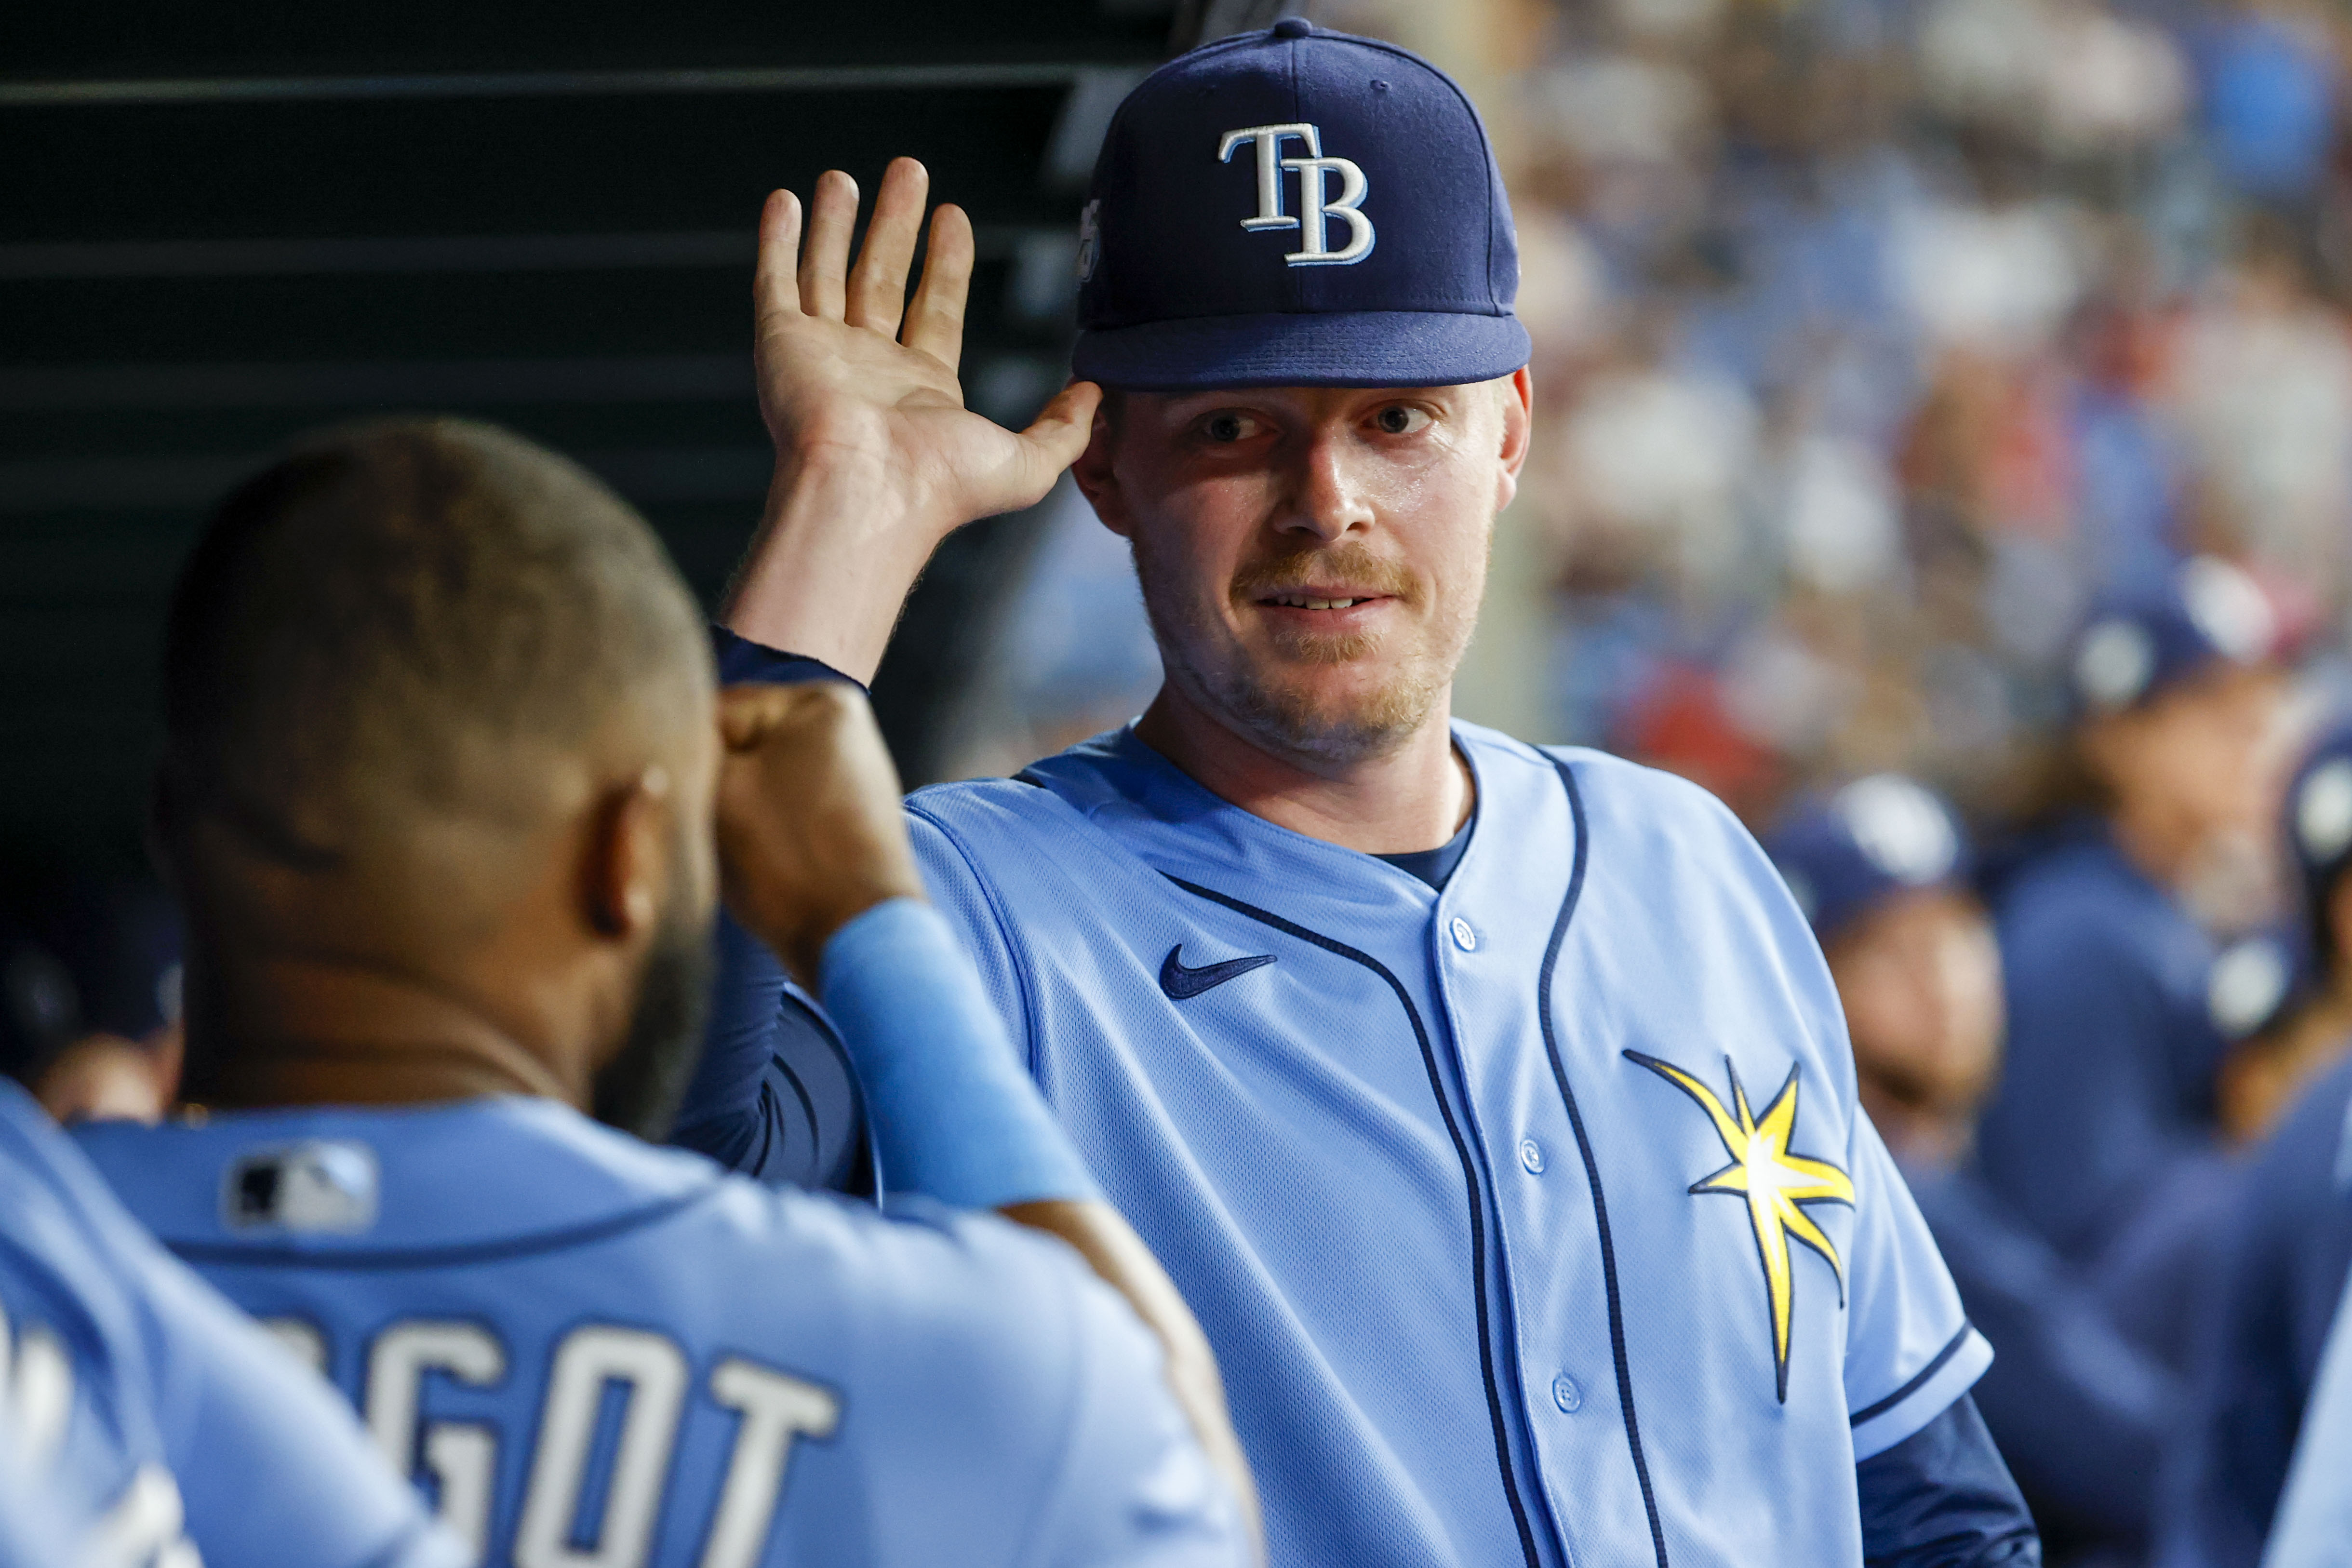 Rays-Royals rained out, will play two on Saturday